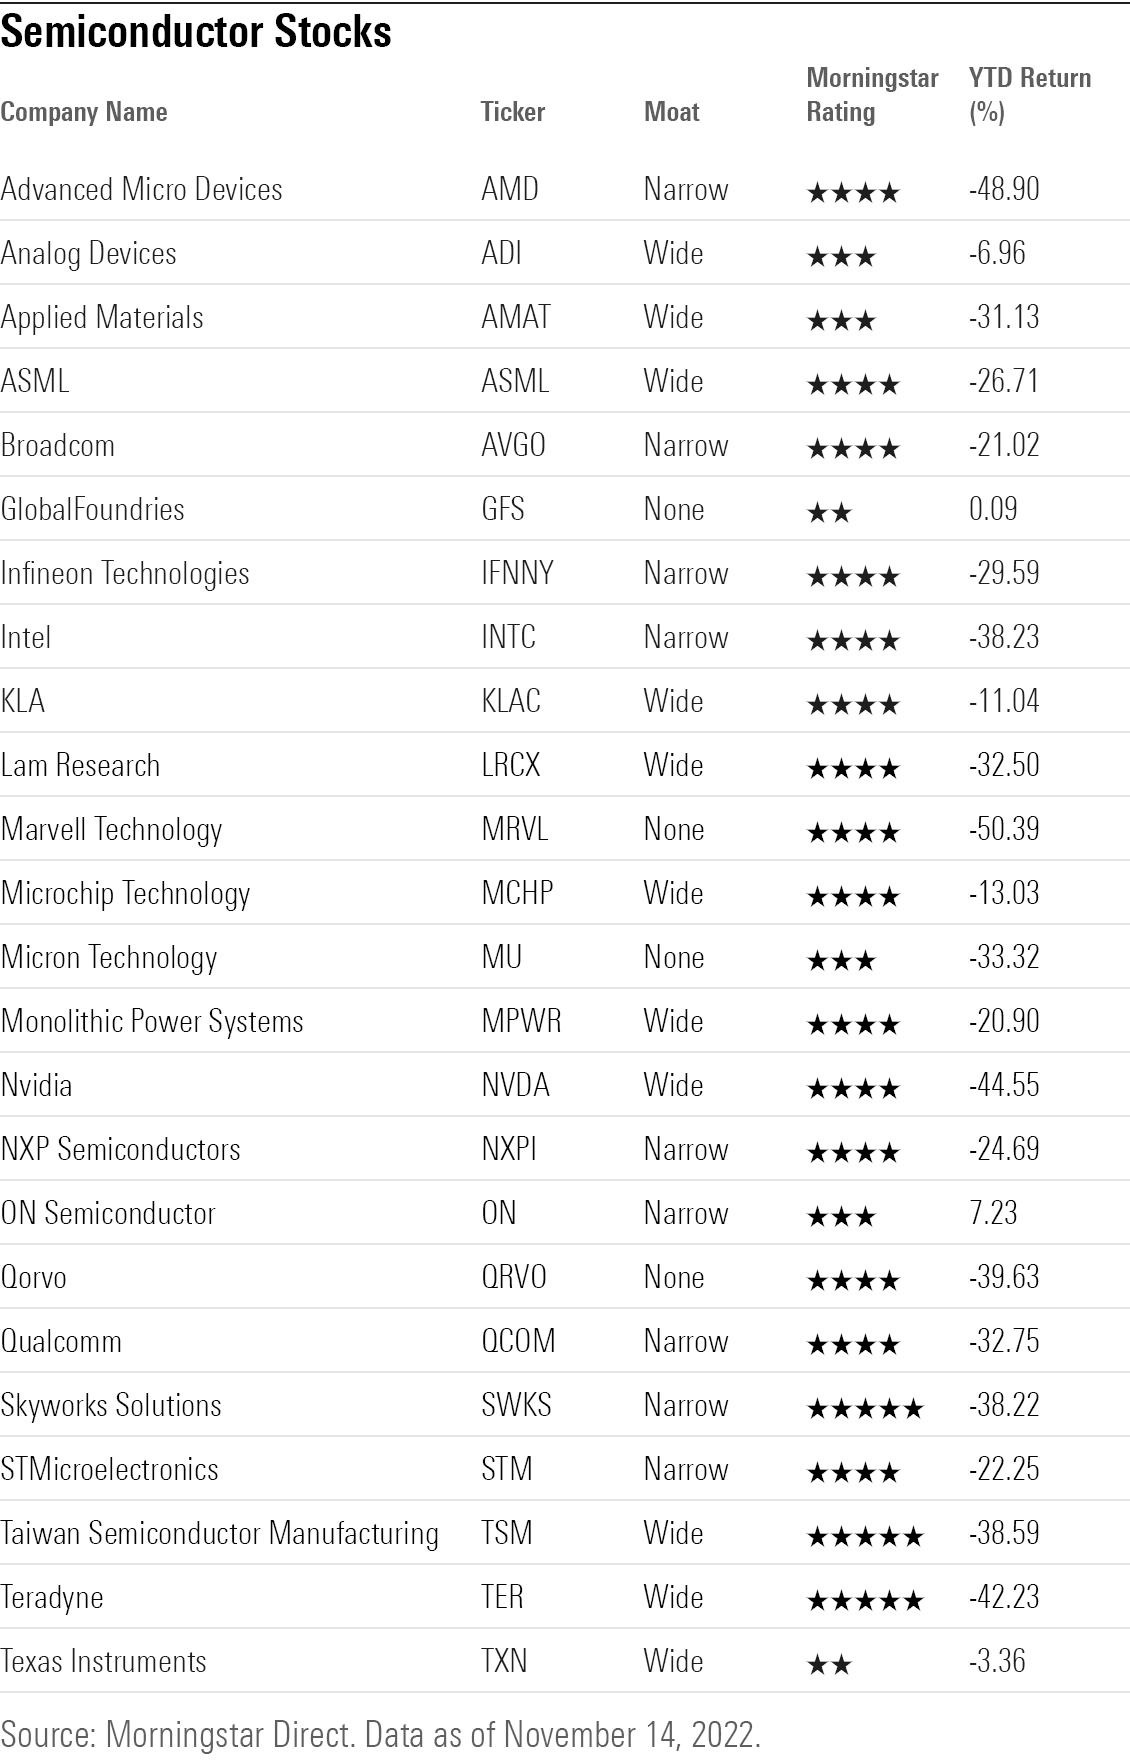 List of semiconductor stocks with ticker, moat, star rating, and 2022 returns.